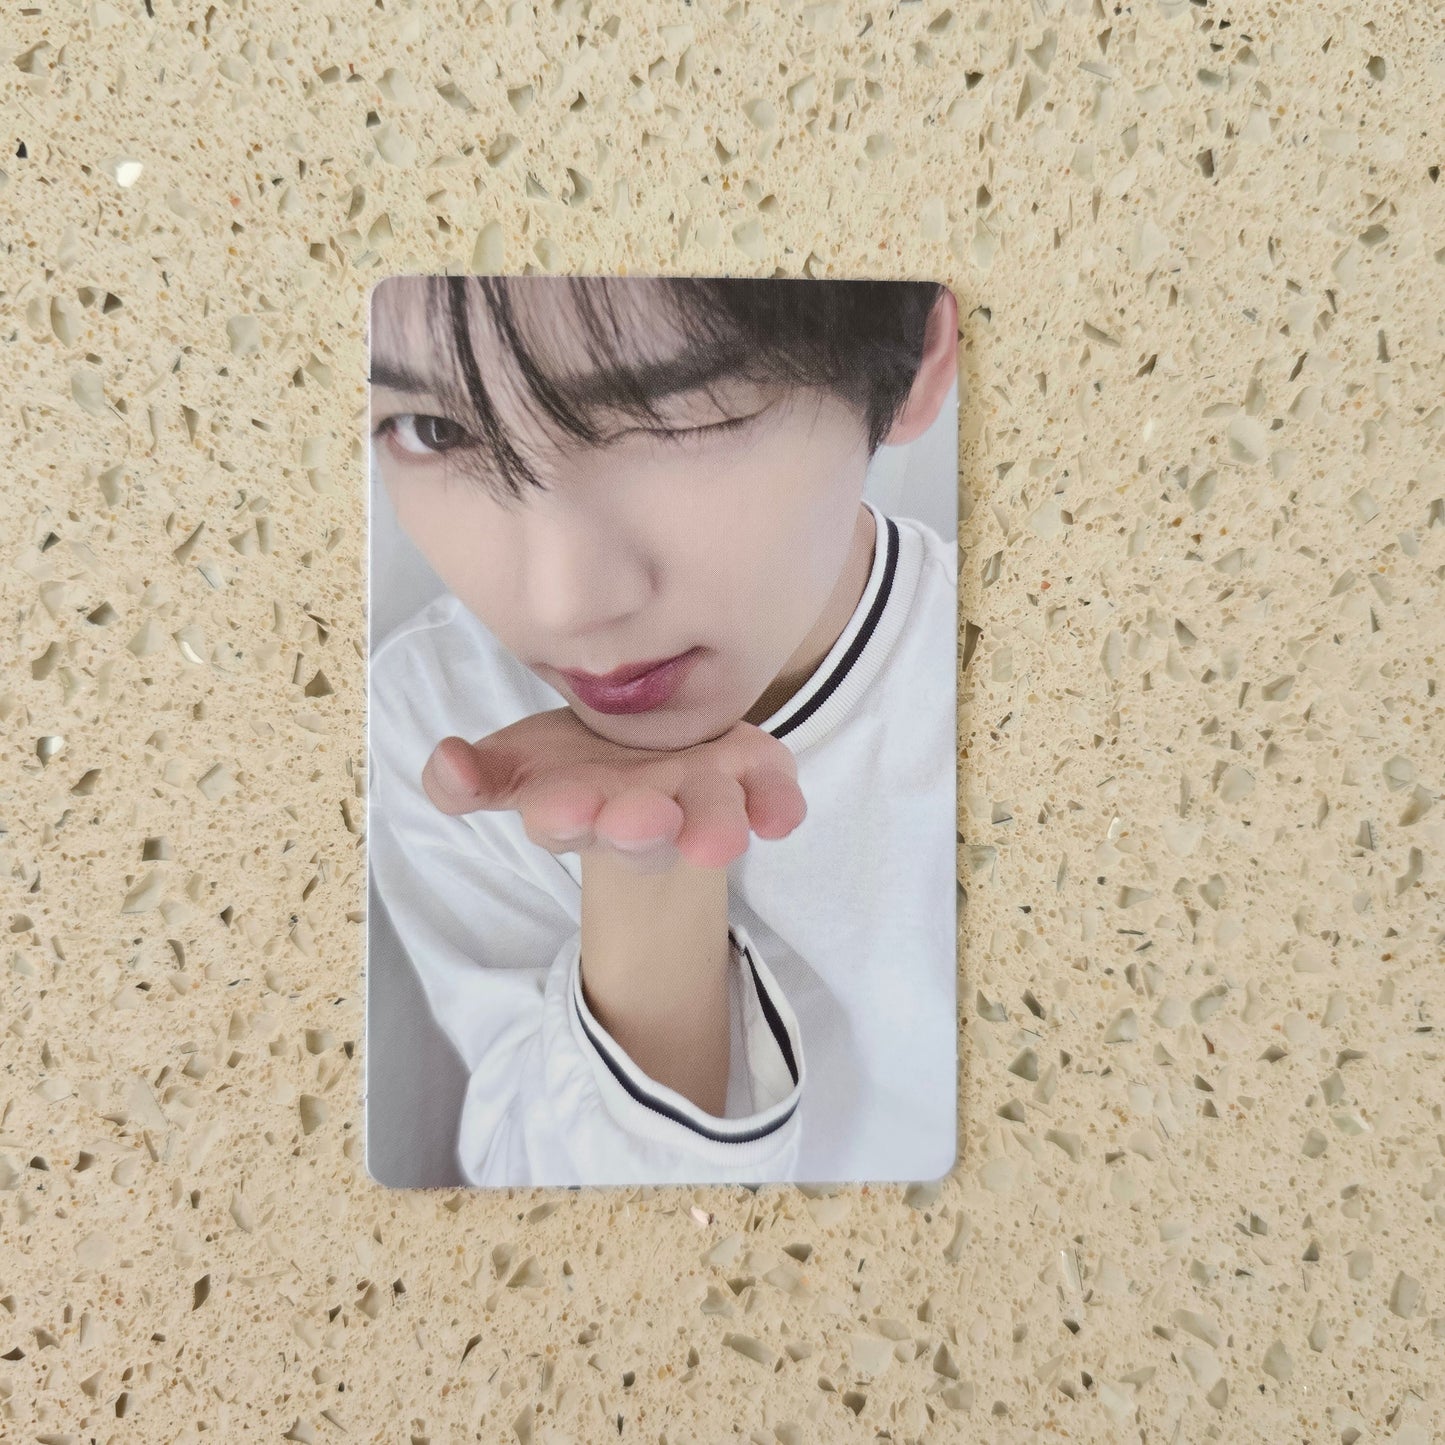 ZEROBASEONE - YOU HAD ME AT HELLO PLUS CHAT POB PHOTOCARDS